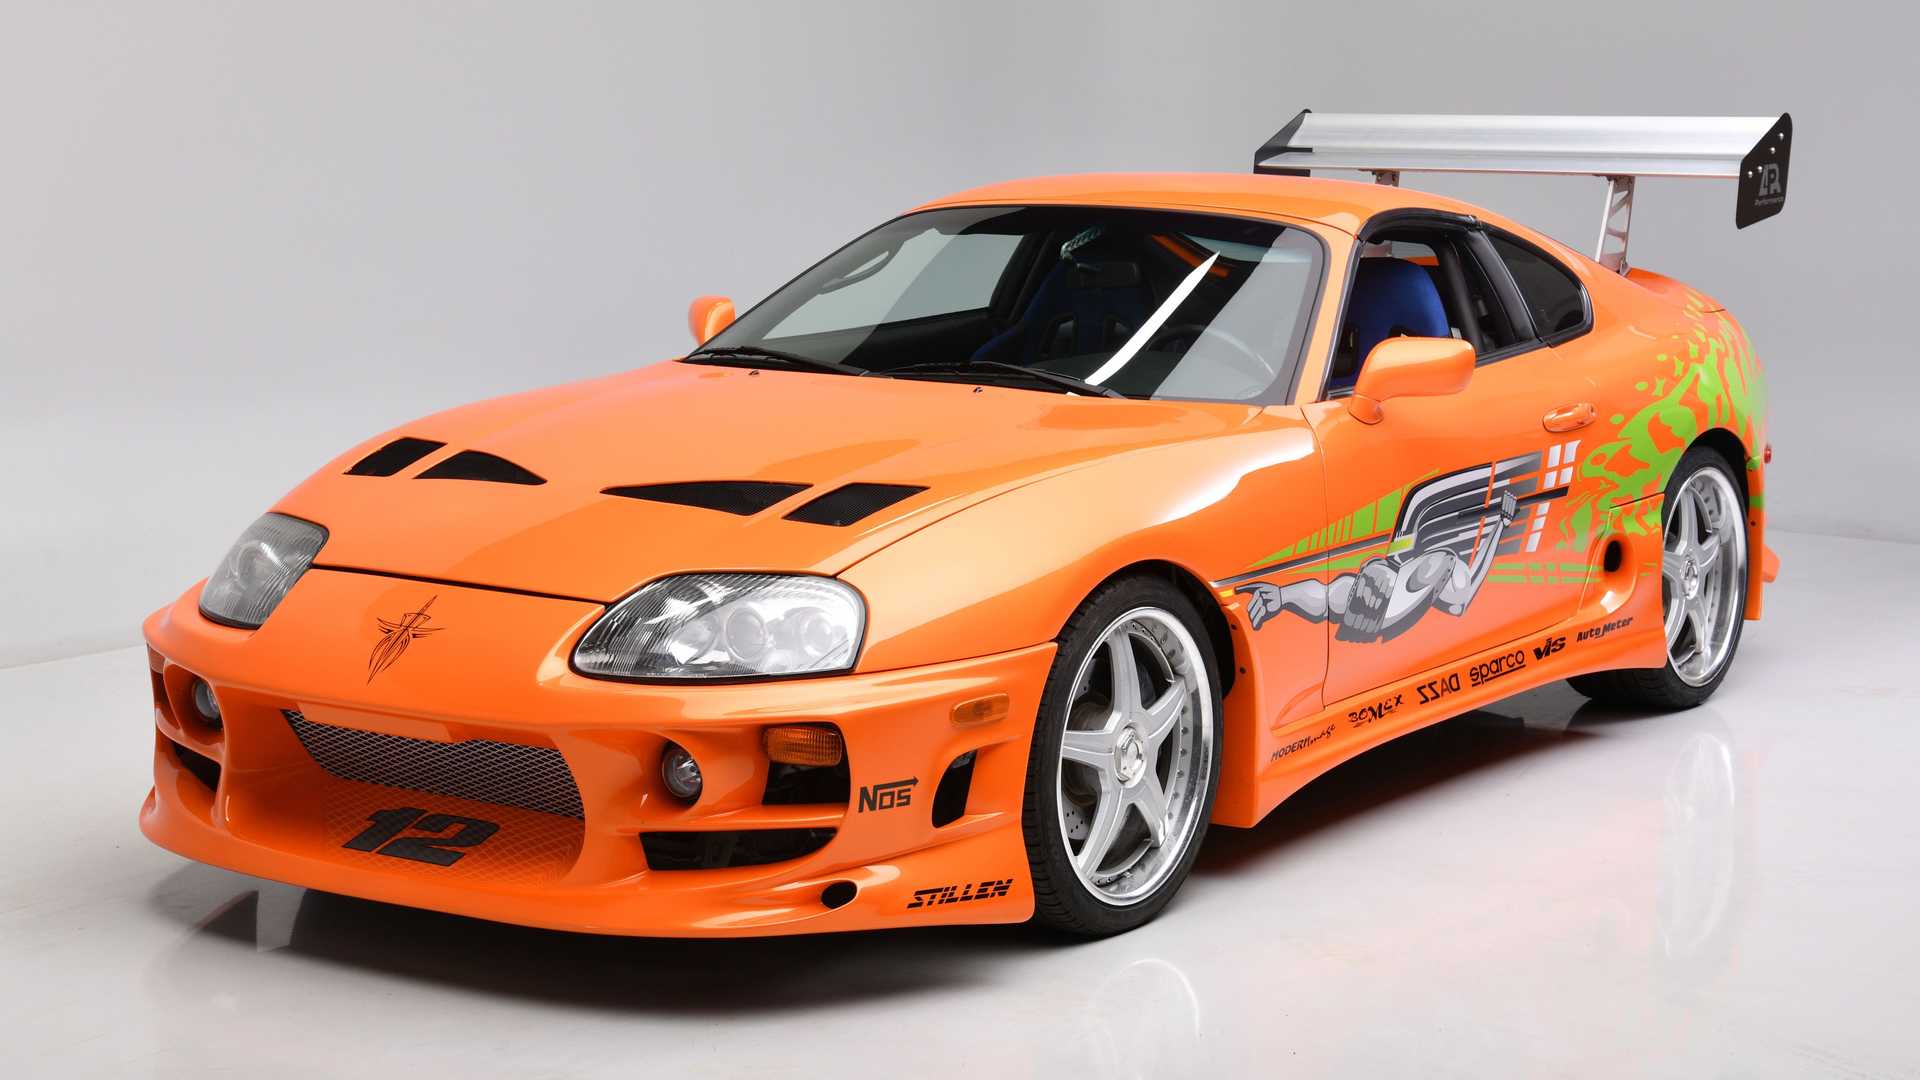 Paul Walker S Toyota Supra From Fast Furious Sells For Record